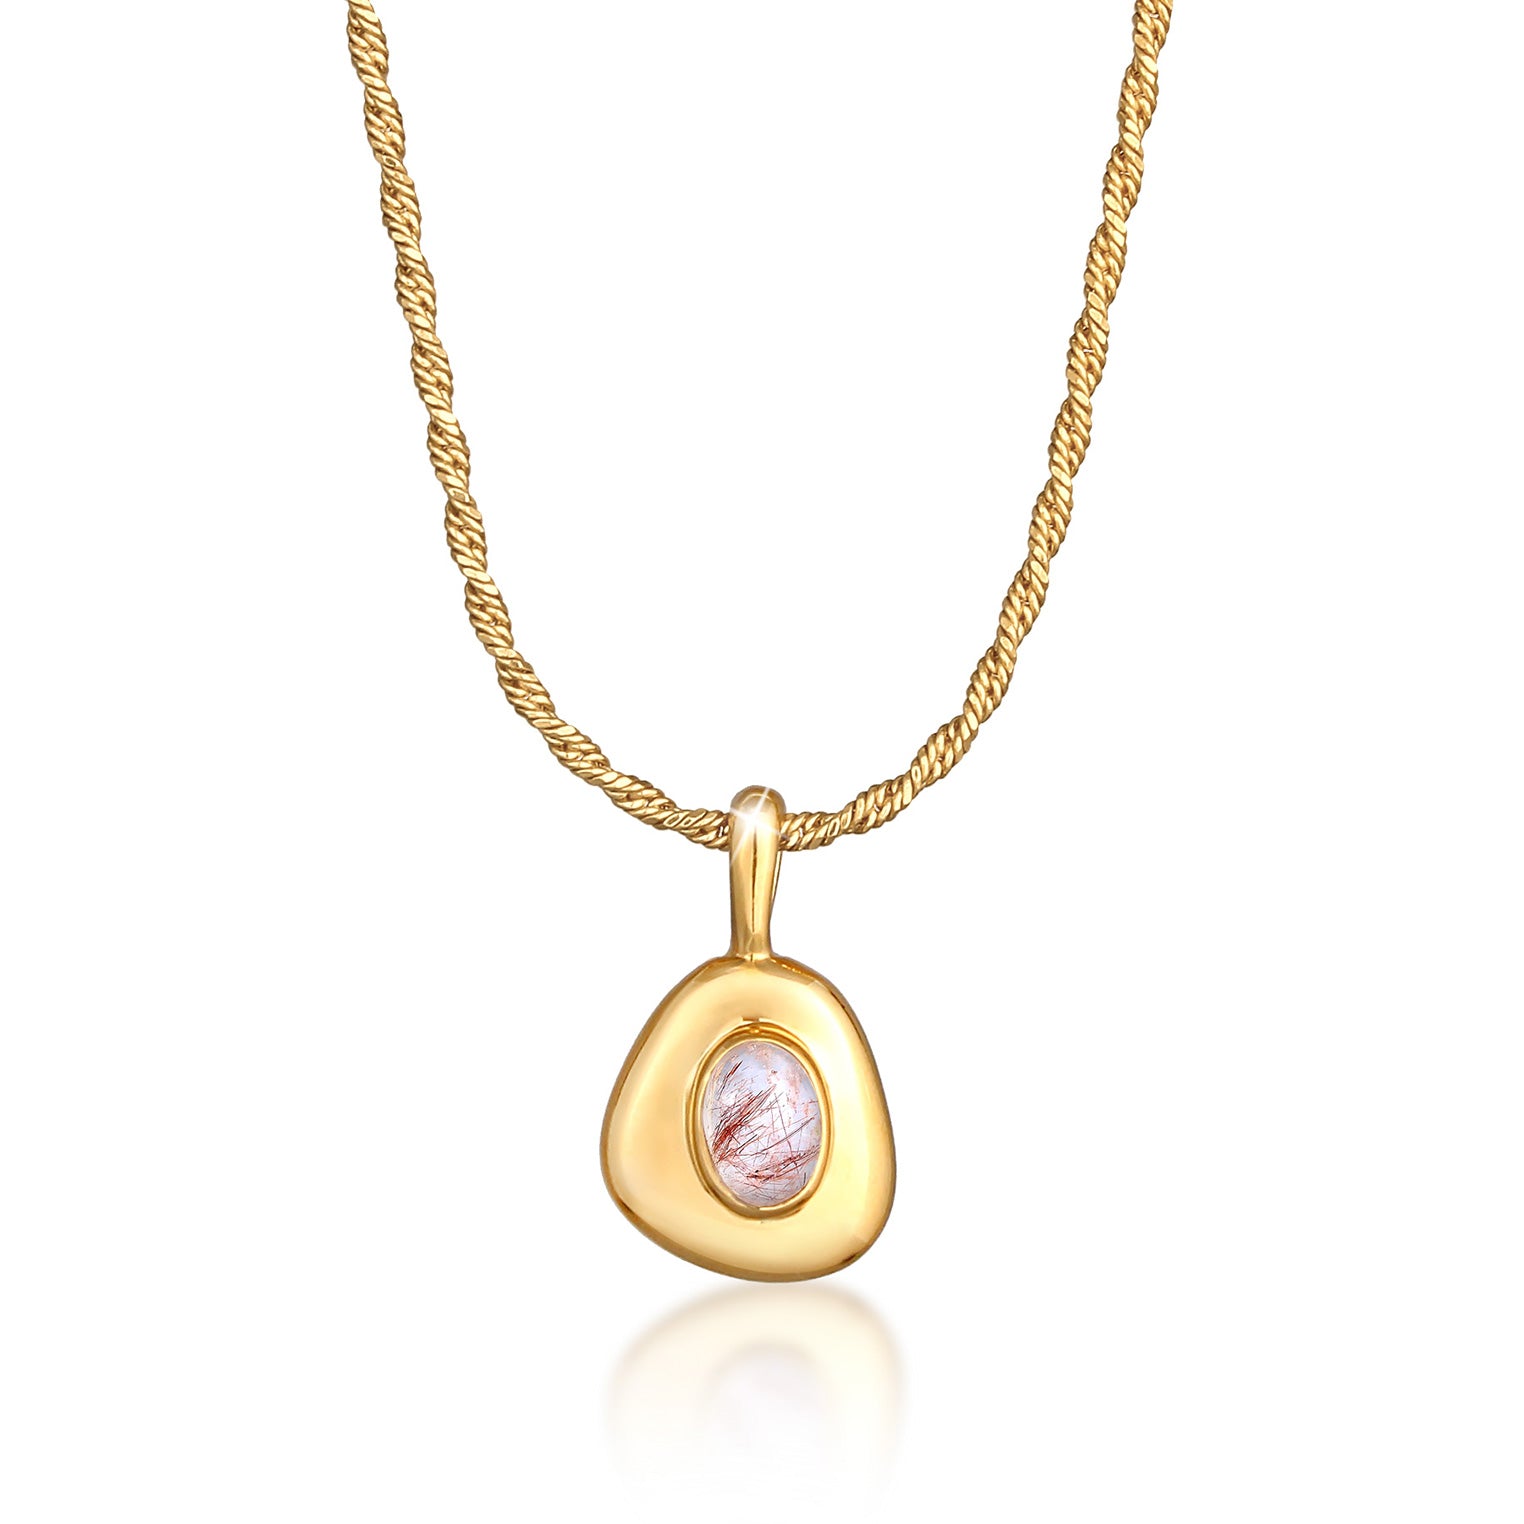 Necklaces Modern or Classic | discover at Elli – Elli Jewelry